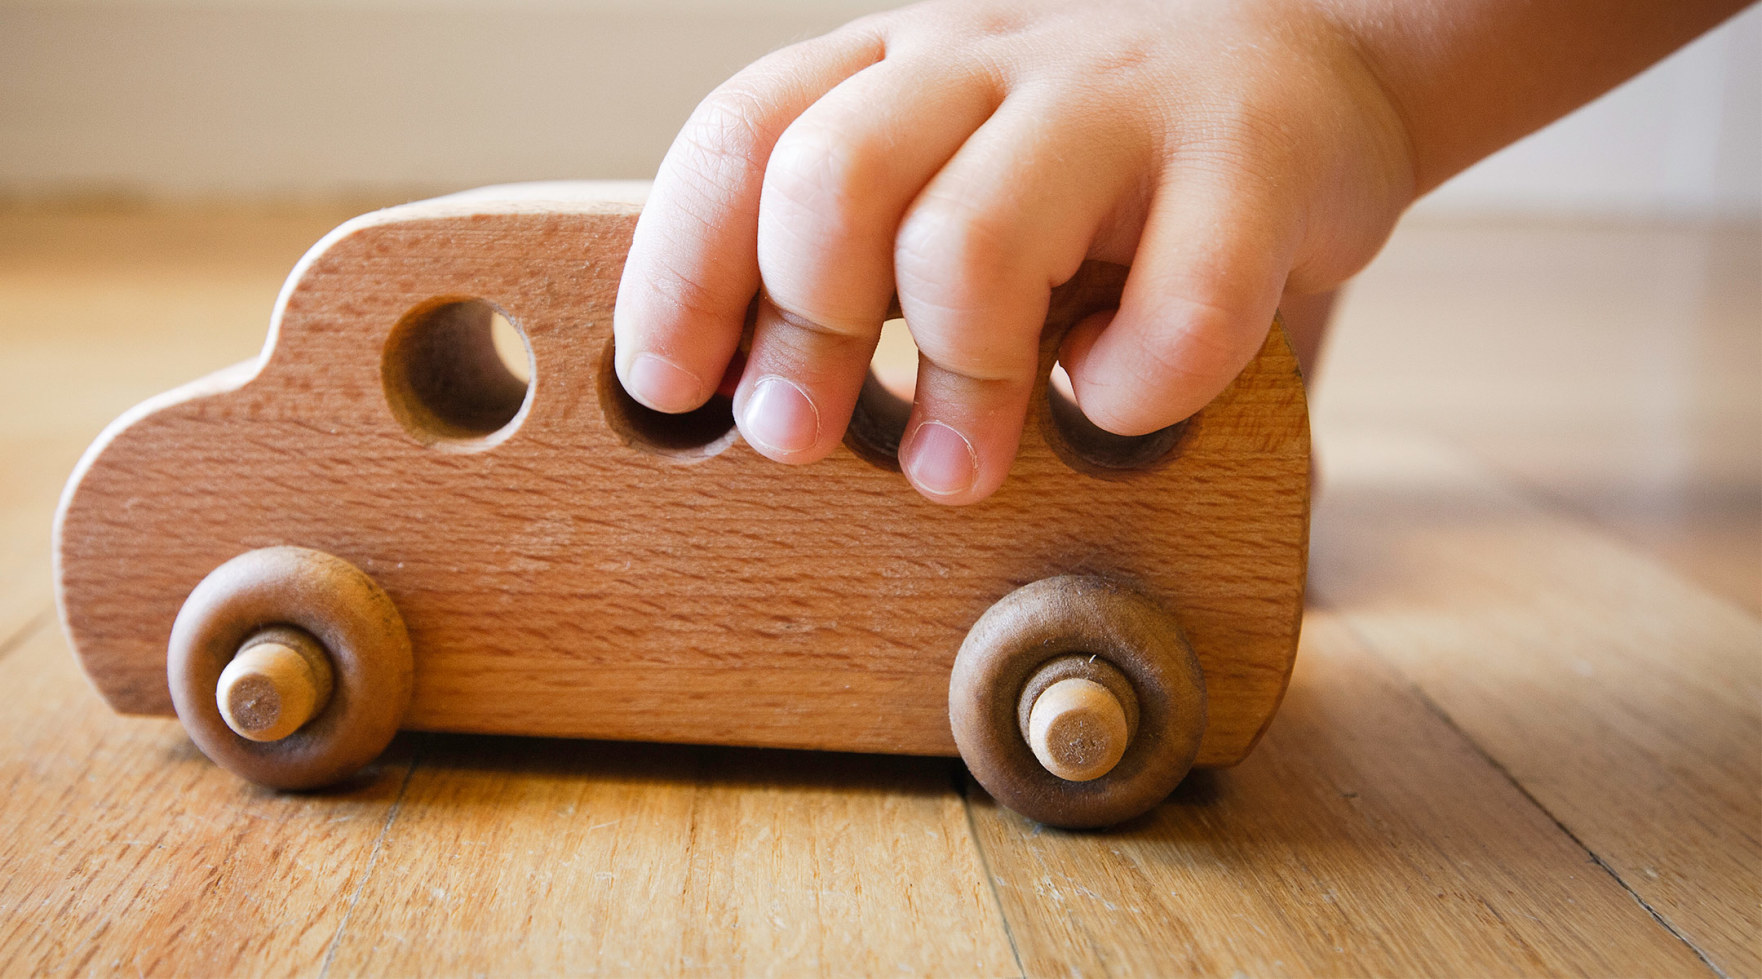 The best wooden toys for toddlers - My Bored Toddler